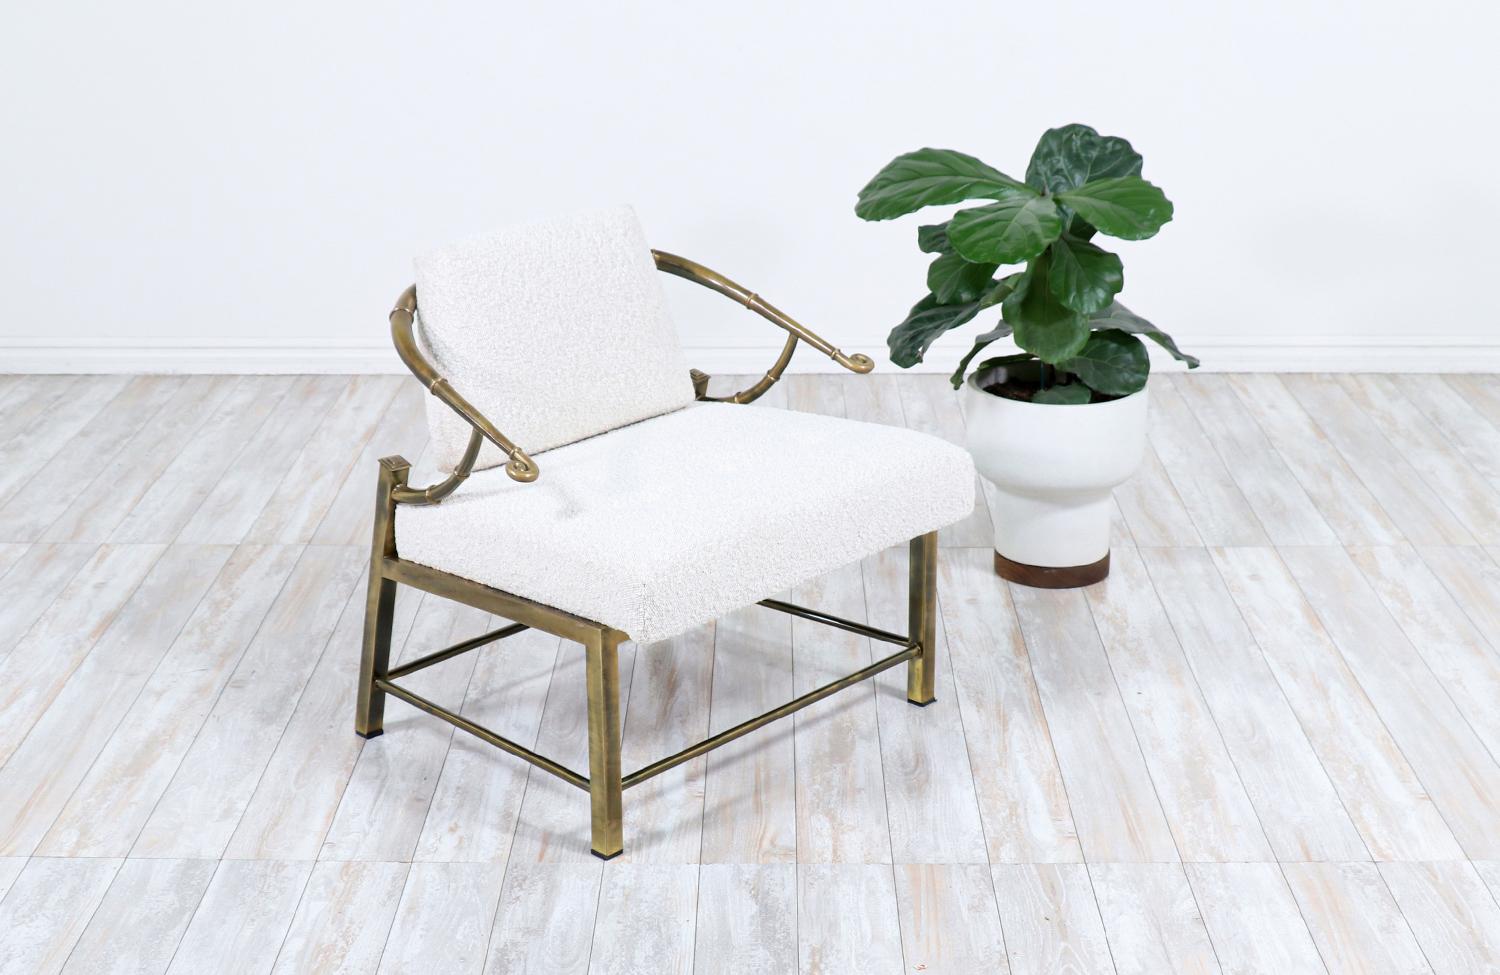 Mid-Century Modern brass accent lounge chair by Weiman / Warren Lloyd.

________________________________________

Transforming a piece of Mid-Century Modern furniture is like bringing history back to life, and we take this journey with passion and